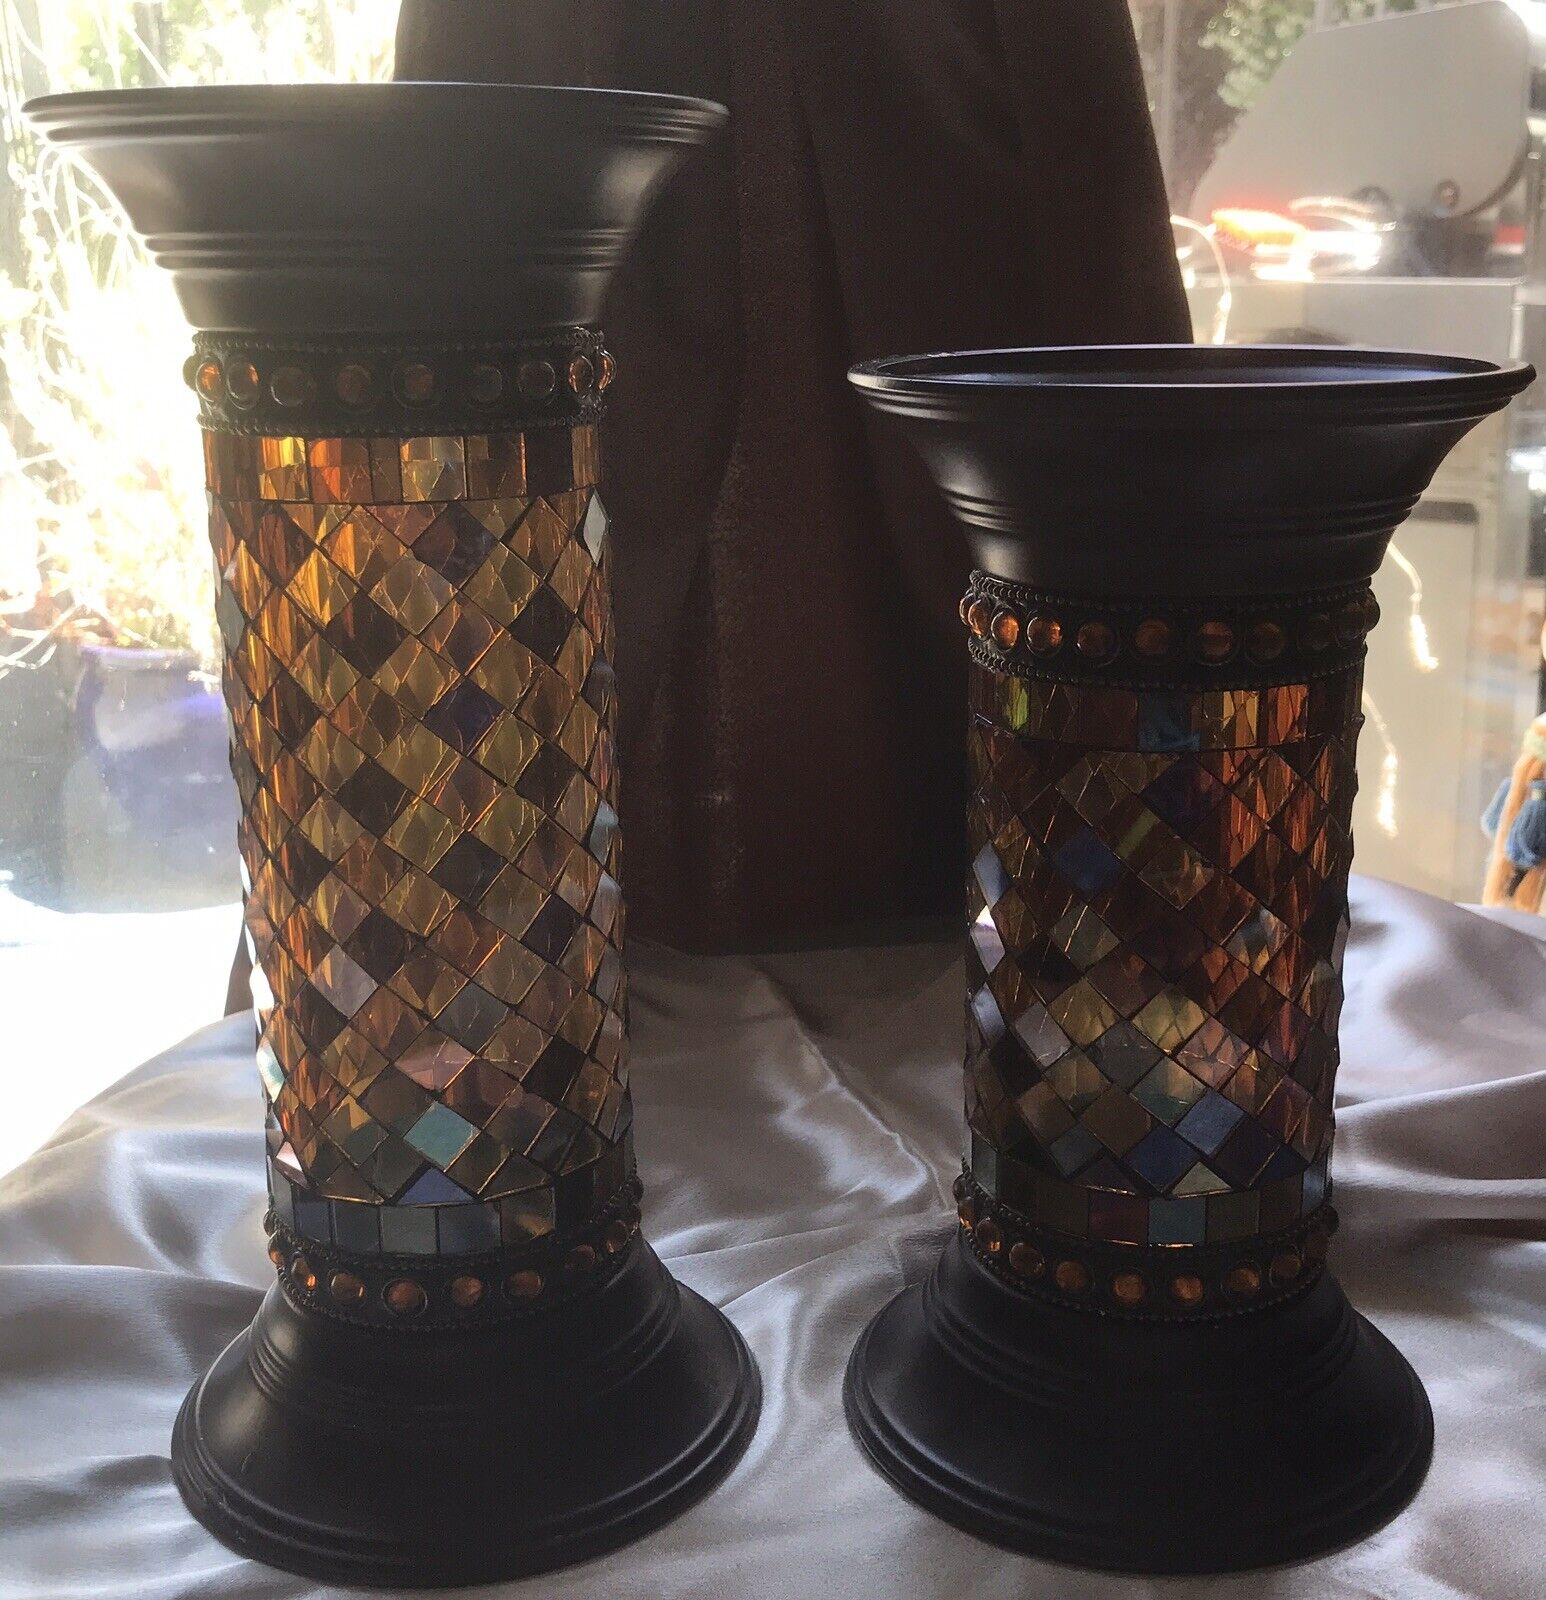 Partylite Mosaic Global Fusion 9 & 11” Pillar Candle Holders Set Of 2 Pre-owned